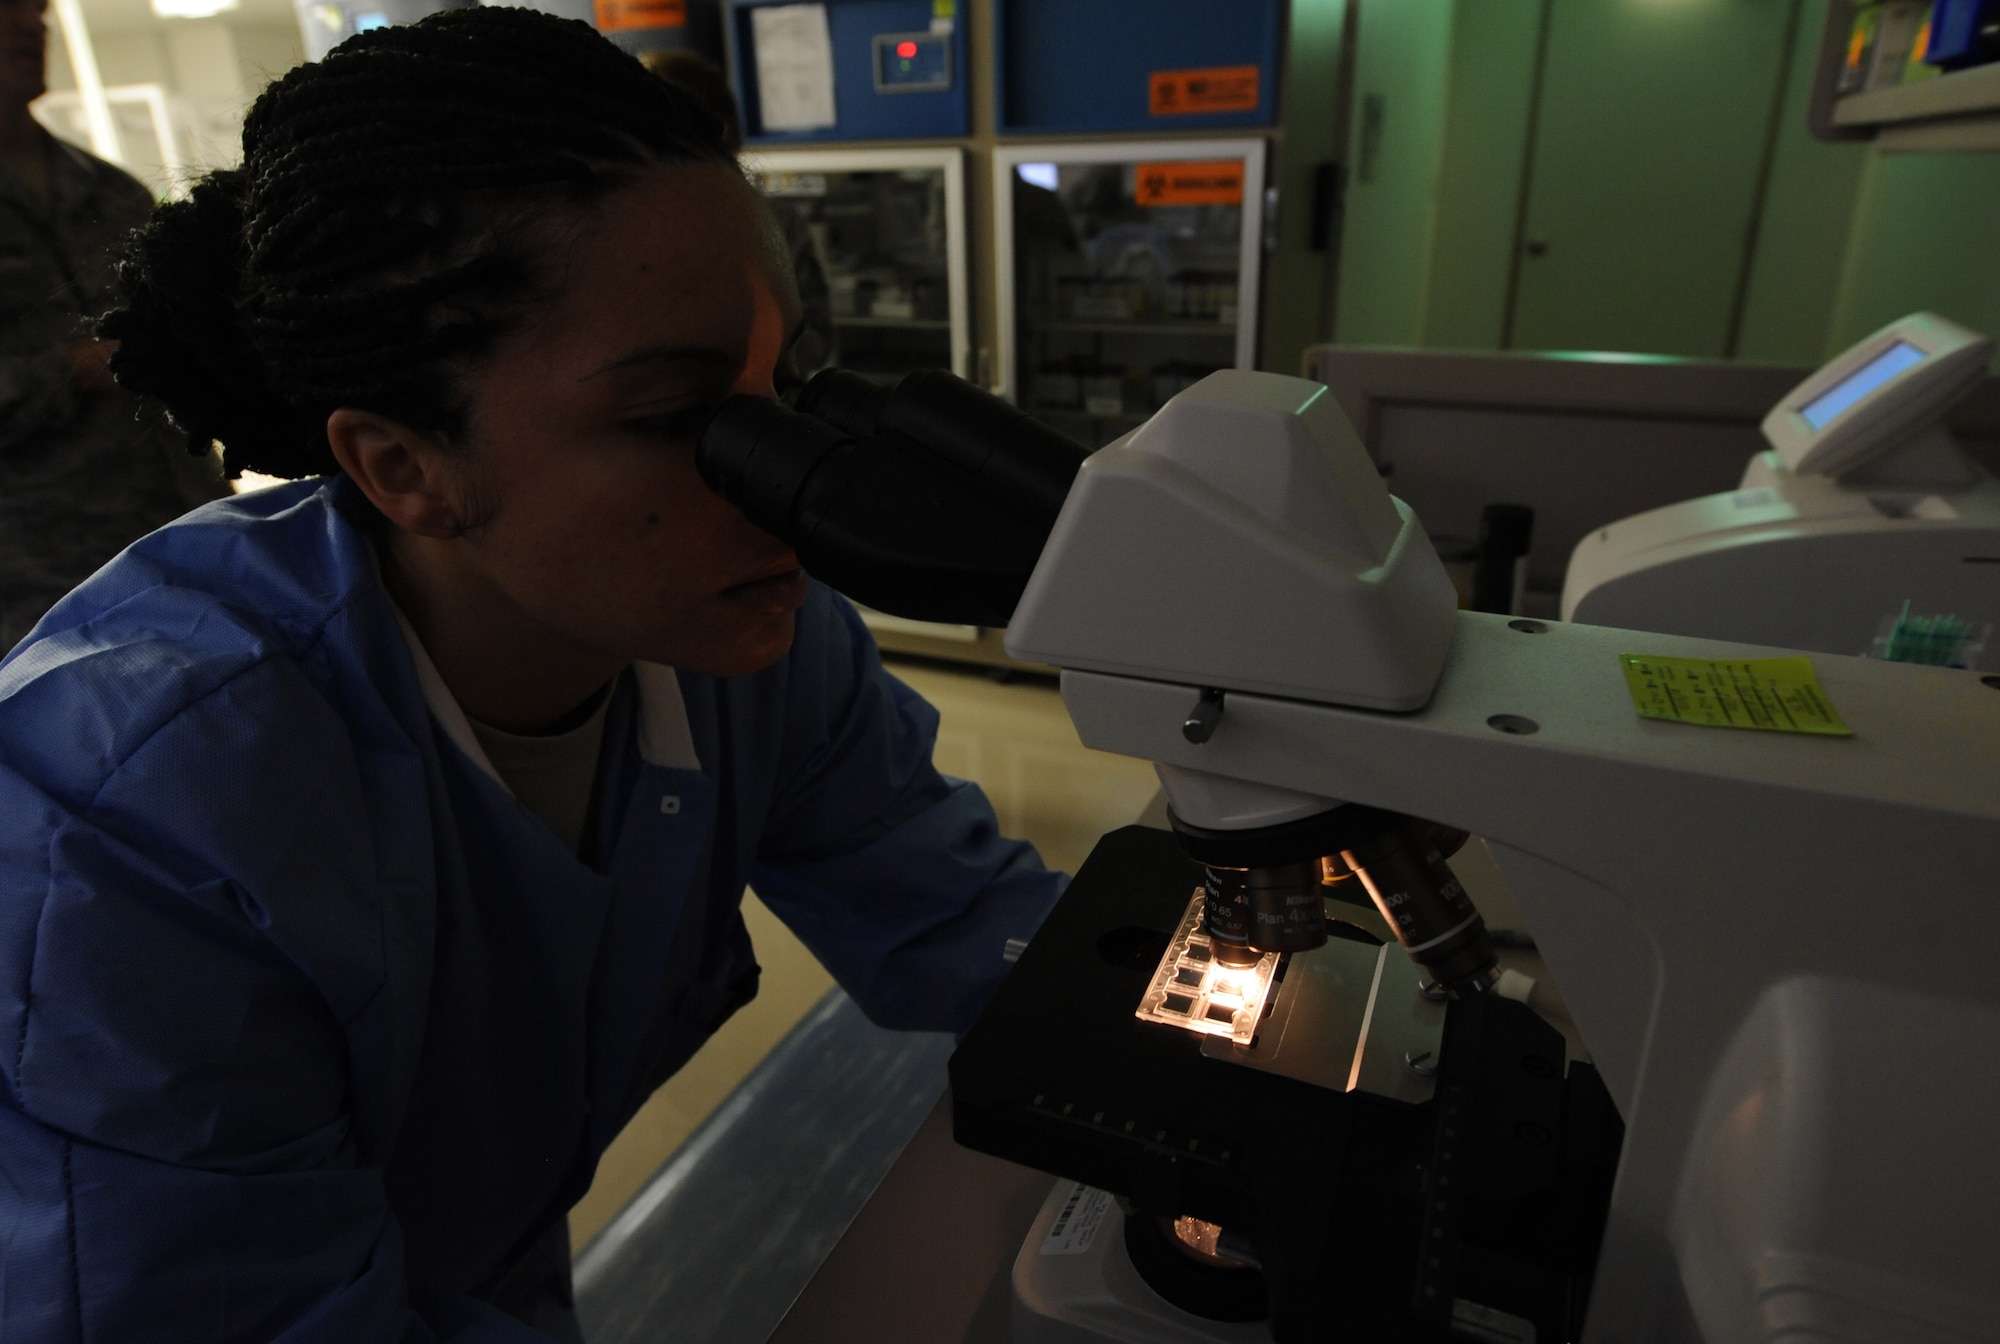 U.S. Air Force Senior Airman Taniah Otis, 18th Medical Support Squadron section supervisor of shipping and hematology, looks through a urinalysis microscope on Kadena Air Base, Japan, March 14, 2013. Otis analyzes specimens for diagnostics testing to check for various bacteria found in the urine sample of patients. (U.S. Air Force photo/Airman 1st Class Keith A. James)